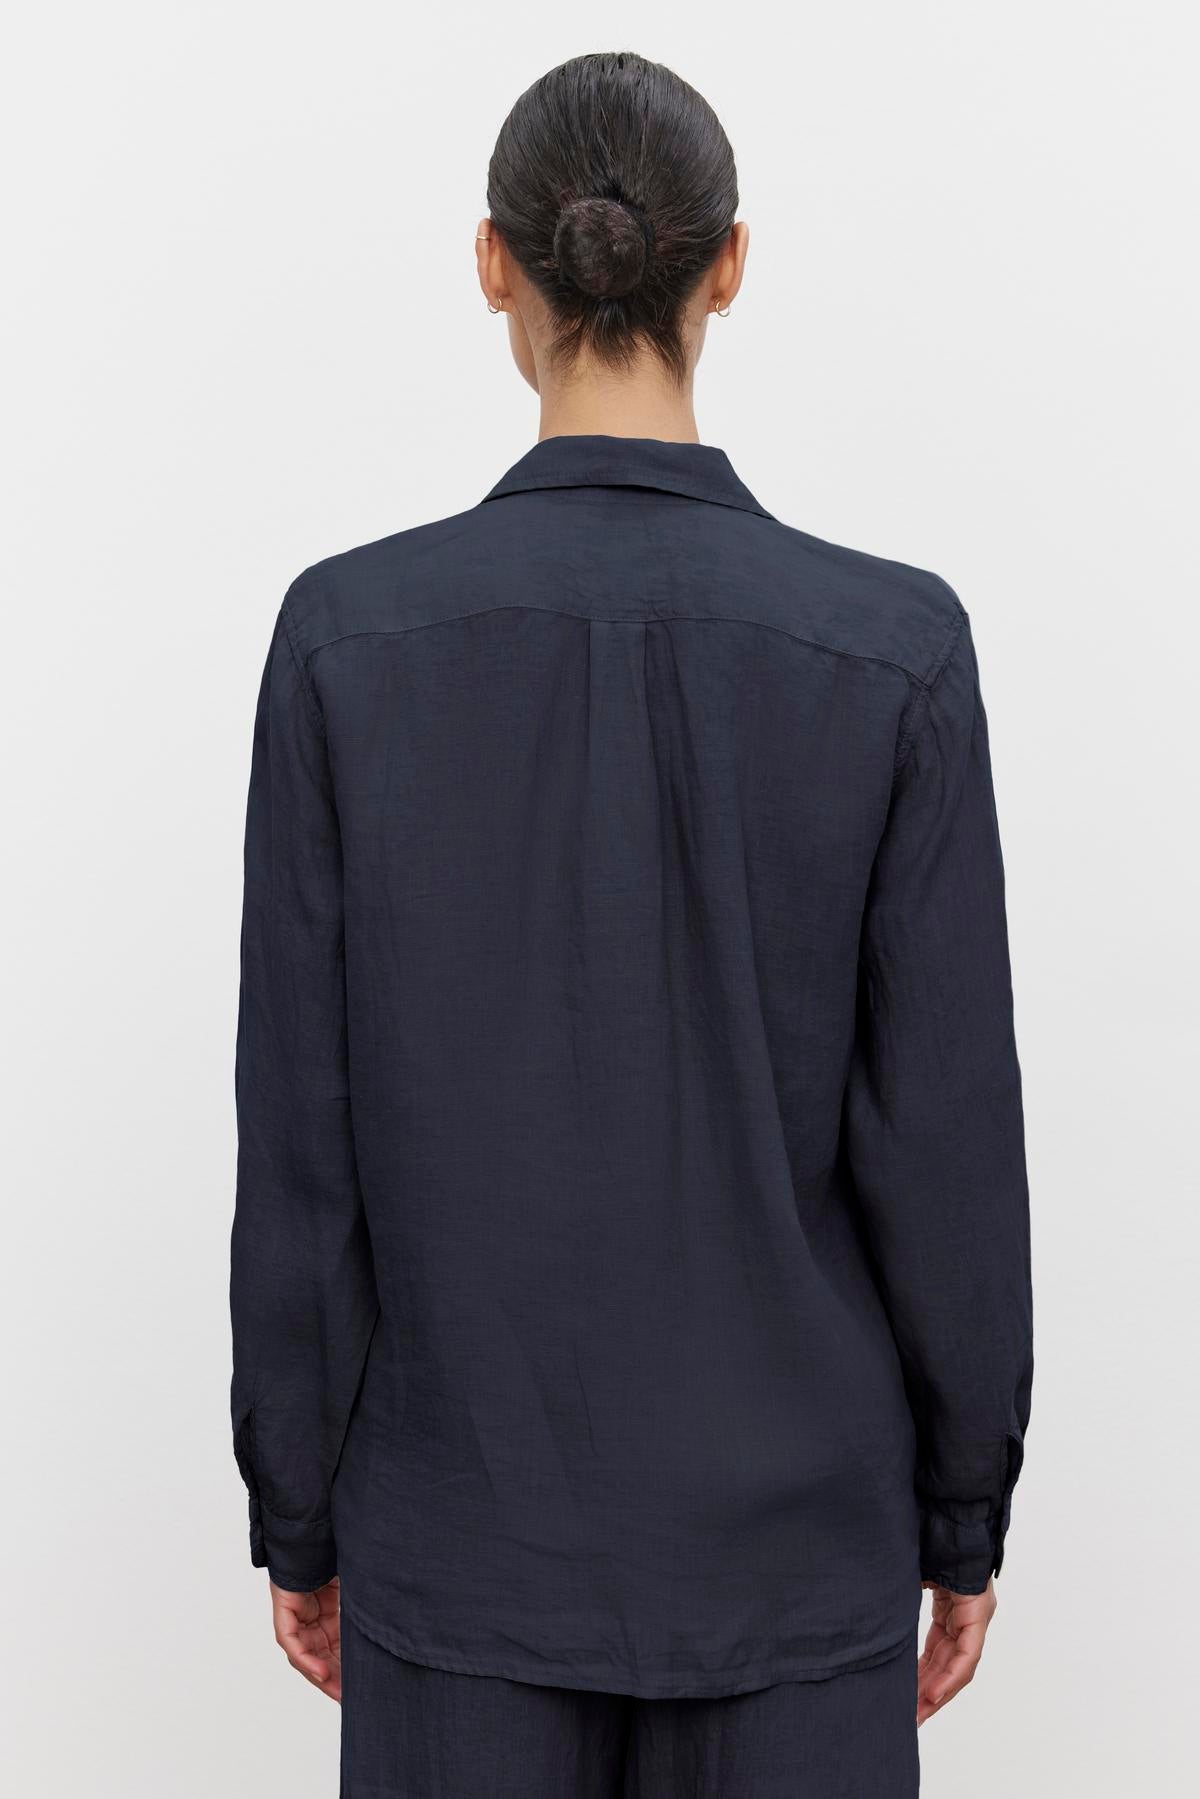 Person with dark hair tied in a bun, wearing the MULHOLLAND LINEN SHIRT by Velvet by Jenny Graham, a long-sleeve navy blue linen button-up shirt with a relaxed silhouette and scooped hemline, viewed from the back against a plain white background.-36592968499393